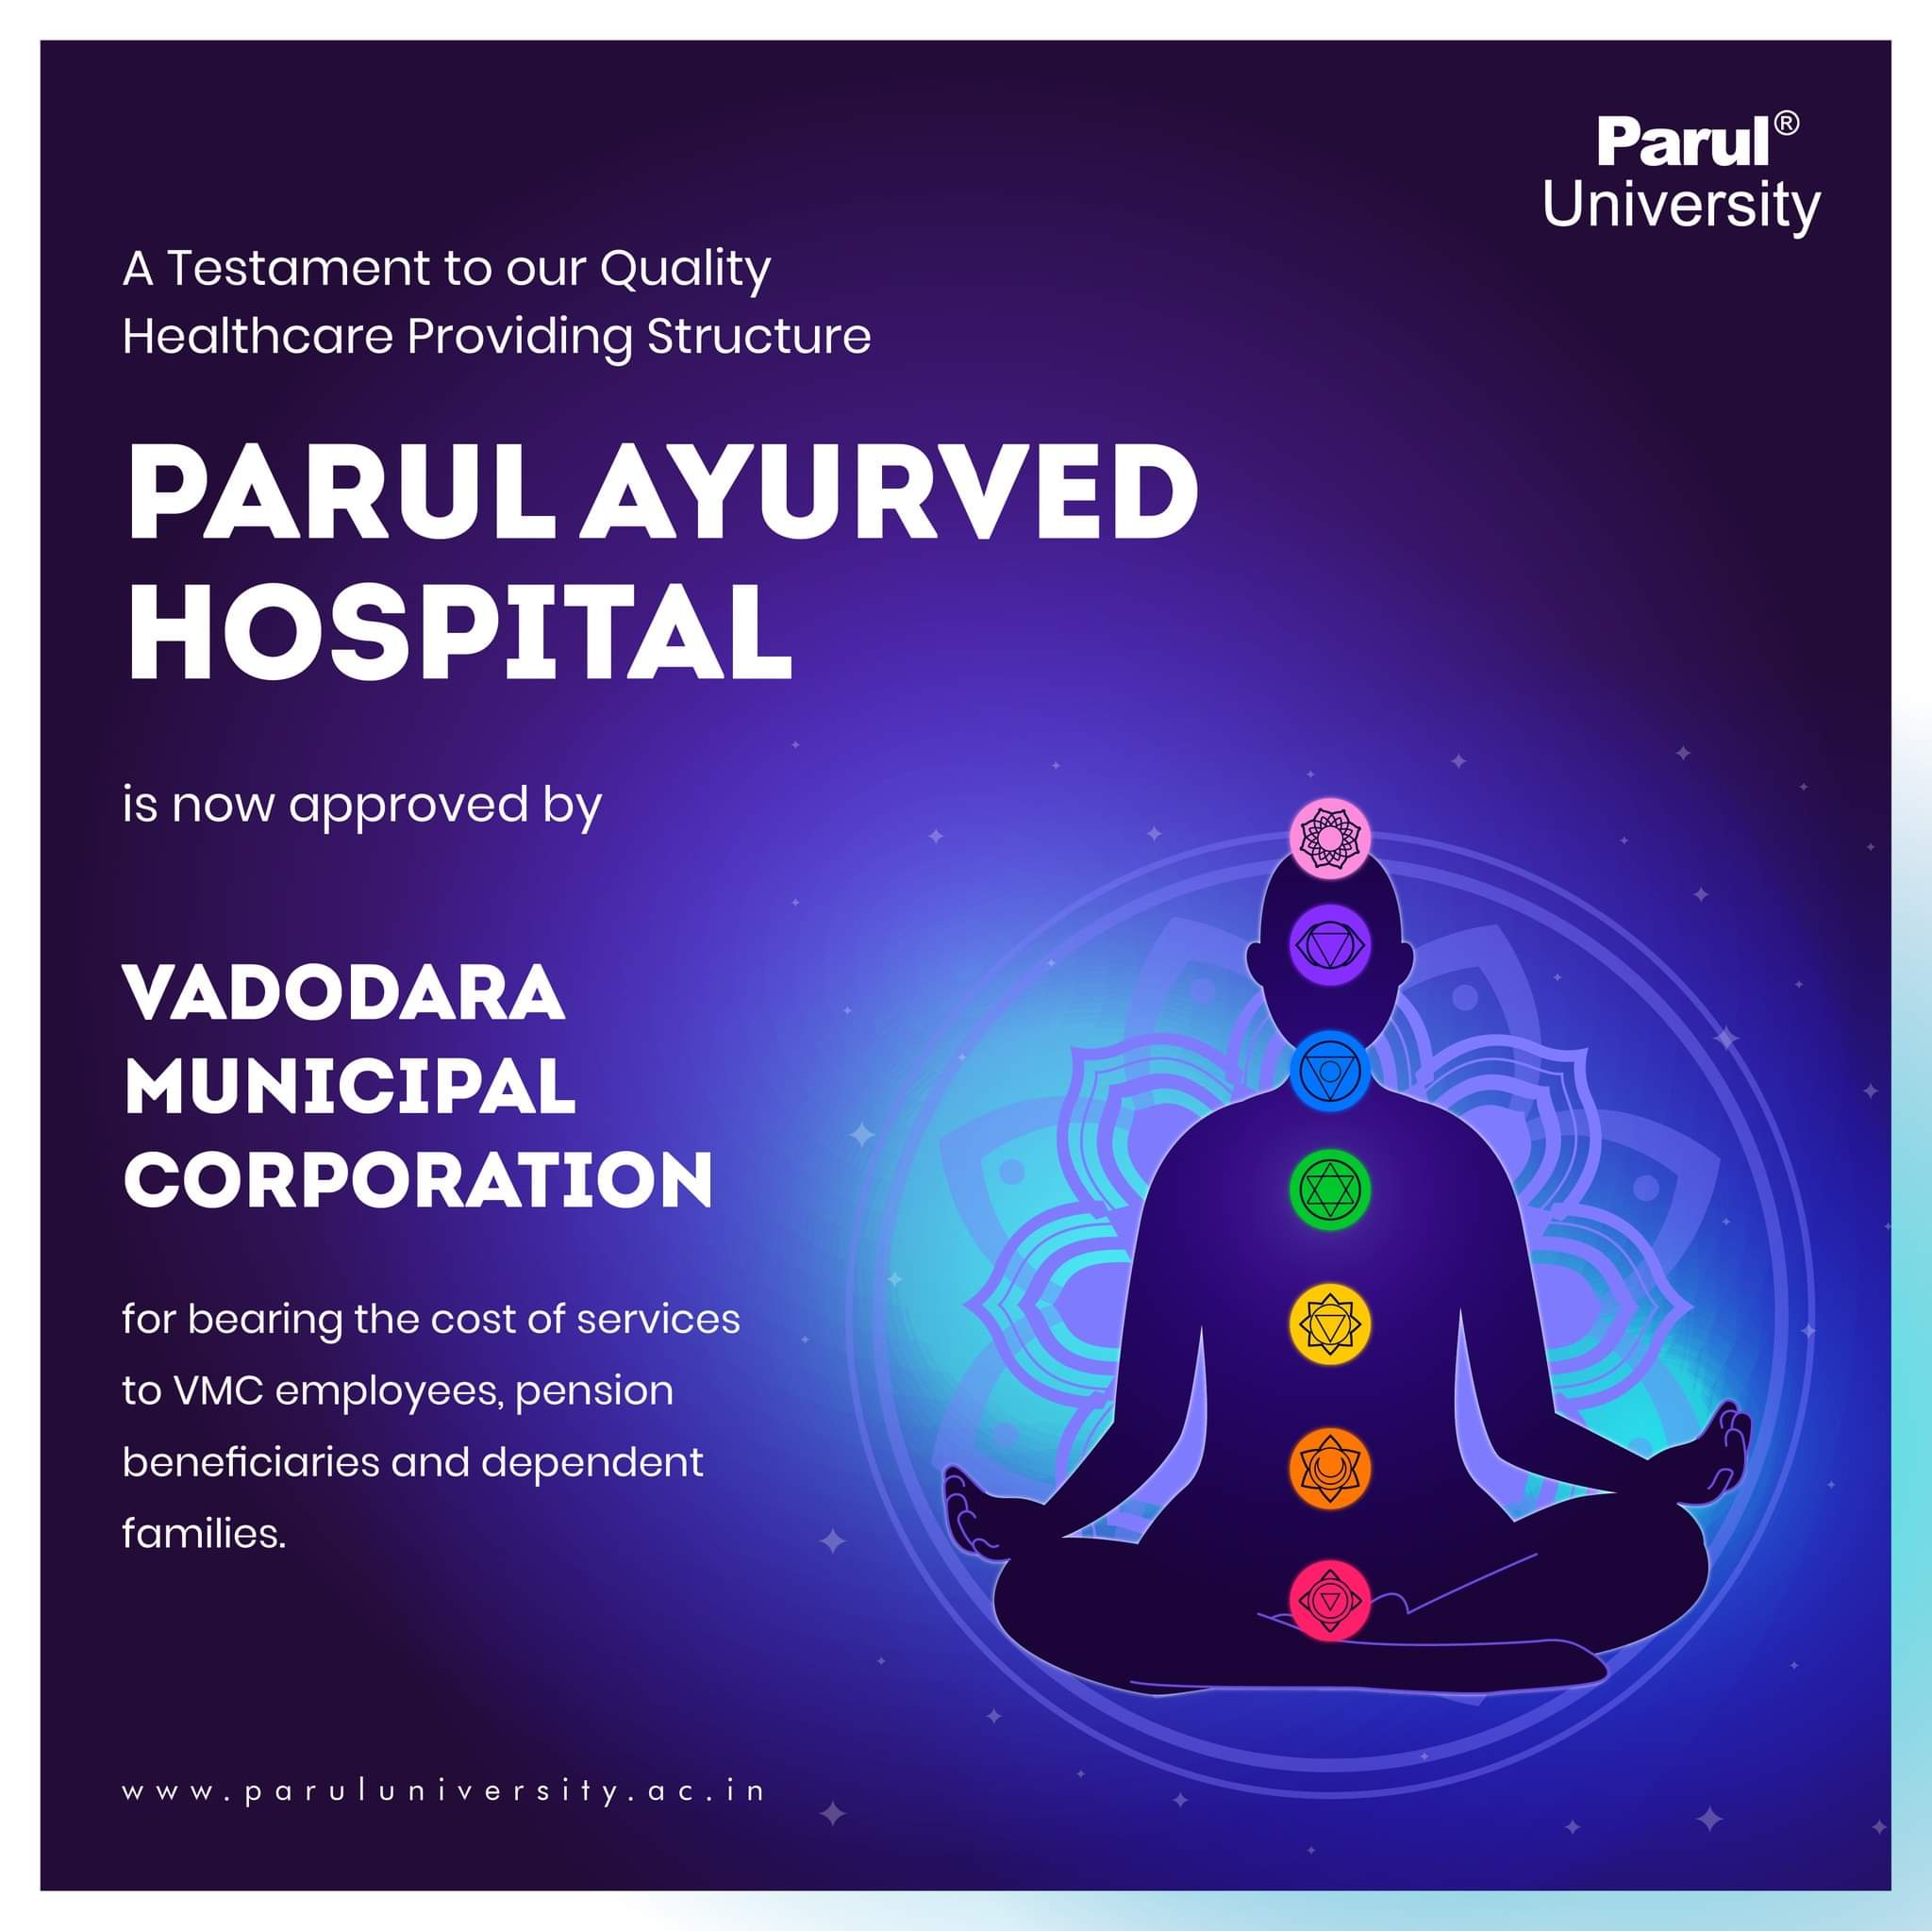 Parul Ayurved Hospital receives approval from the Vadodara Municipality for bearing the cost of health care services.